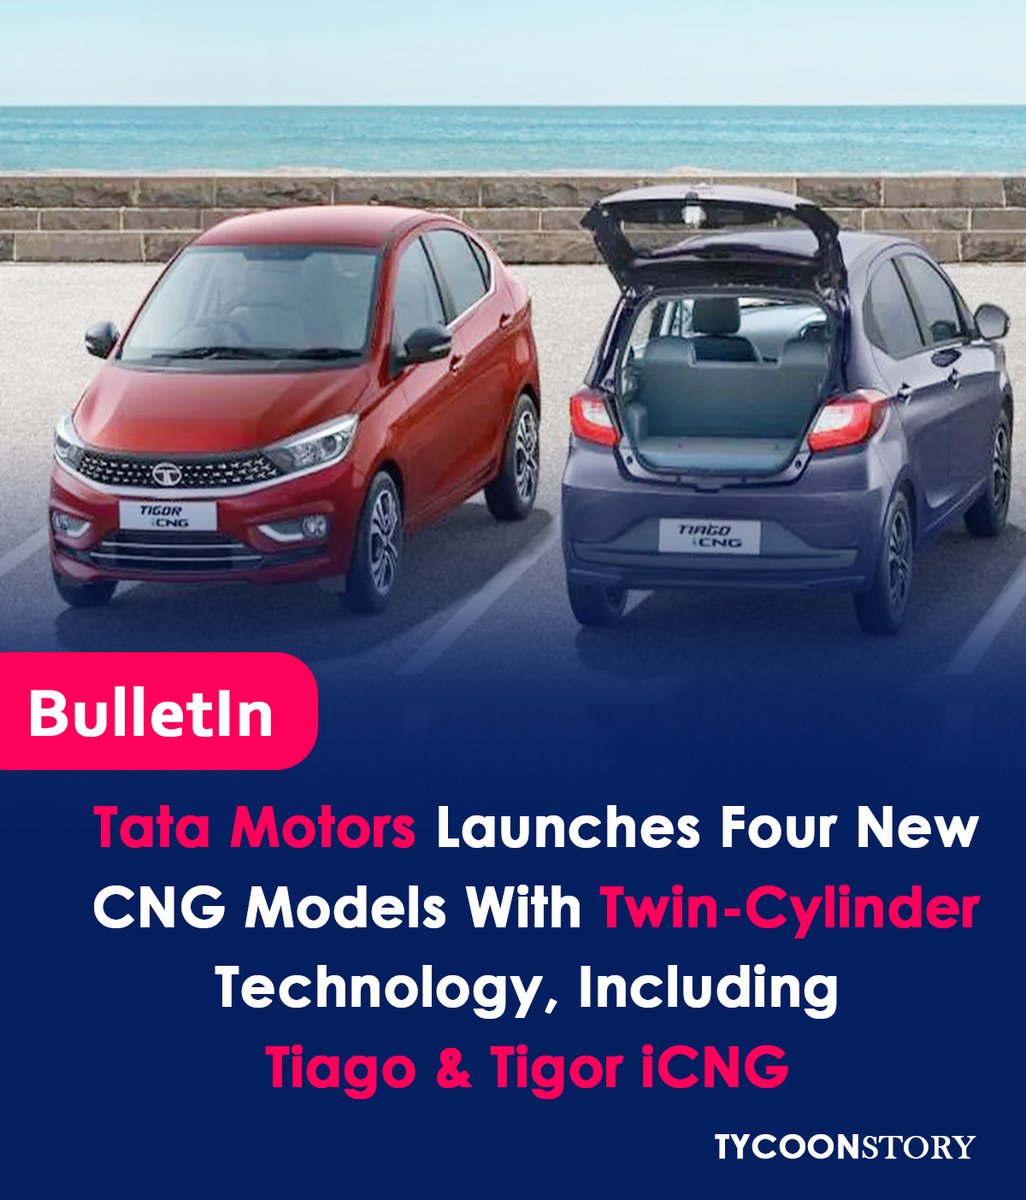 Twin-cylinder Cng Tank Technology Was Used To Introduce The Tata Tiago And Tigor Icng.
#TataTiagoCNG #TigorCNG #TwinCylinderCNG #FuelEfficiency #EnvironmentFriendly #TataMotorsCNG #GreenMobility #CNGTechnology
#TataCNGLaunch #TwinTankCNG #TataGreenDrive @TataMotors